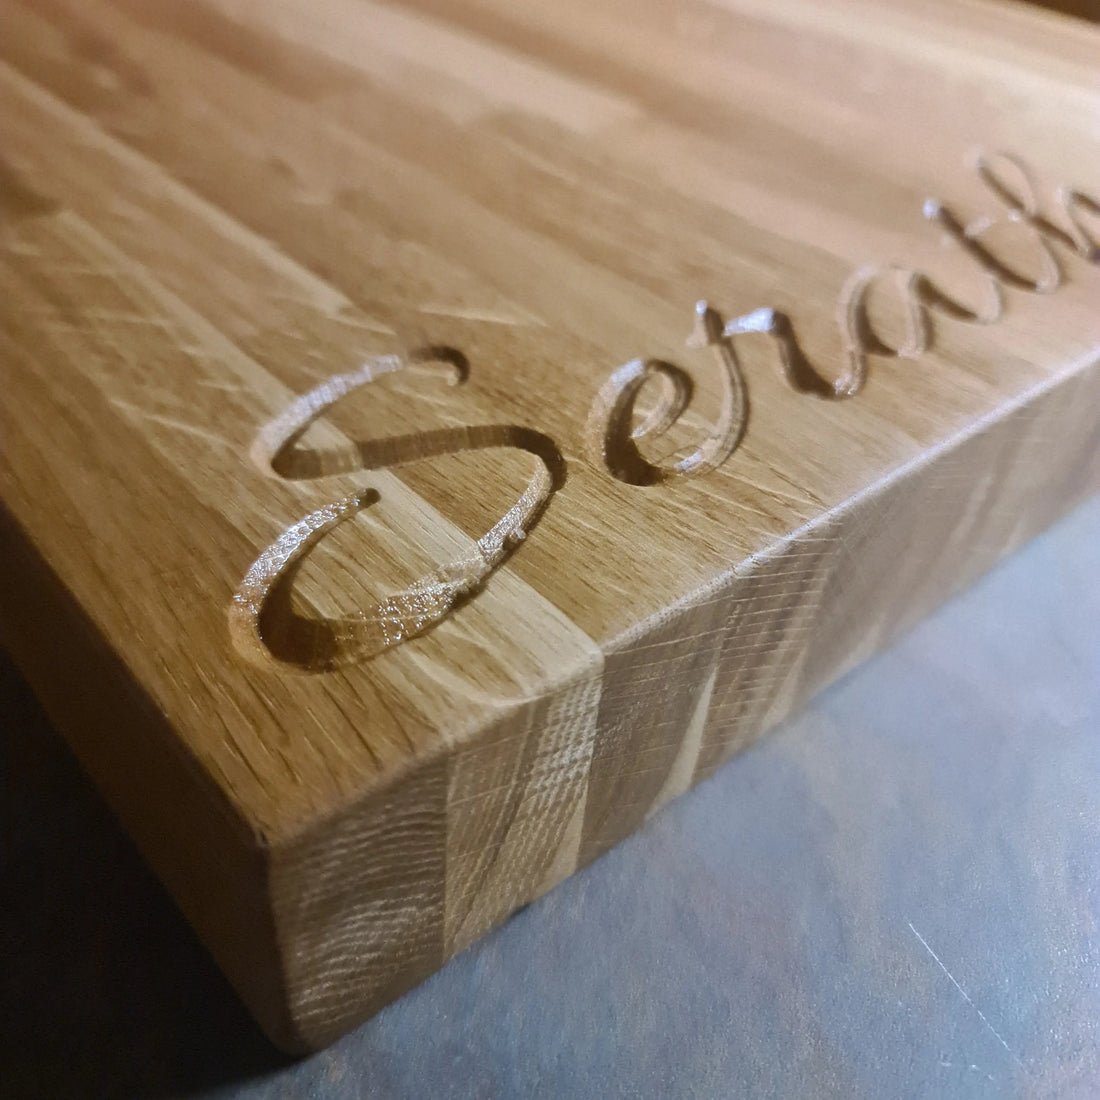 How We Engrave with a CNC Machine at "Serathena" and Why We Love It so much! Scent Sational Wax melts